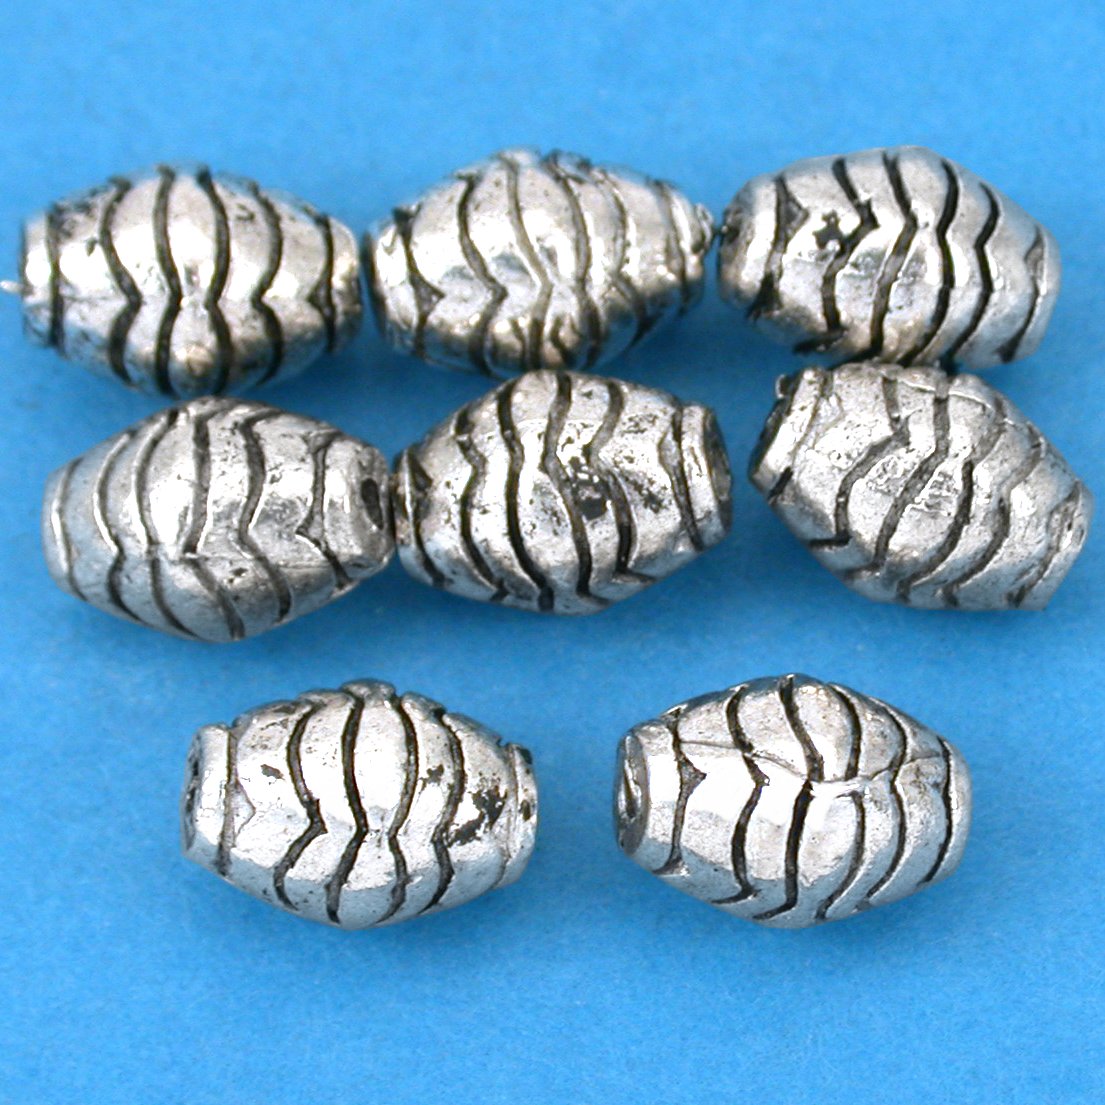 Bali Barrel Antique Silver Plated Beads 10mm 15 Grams 8Pcs Approx.